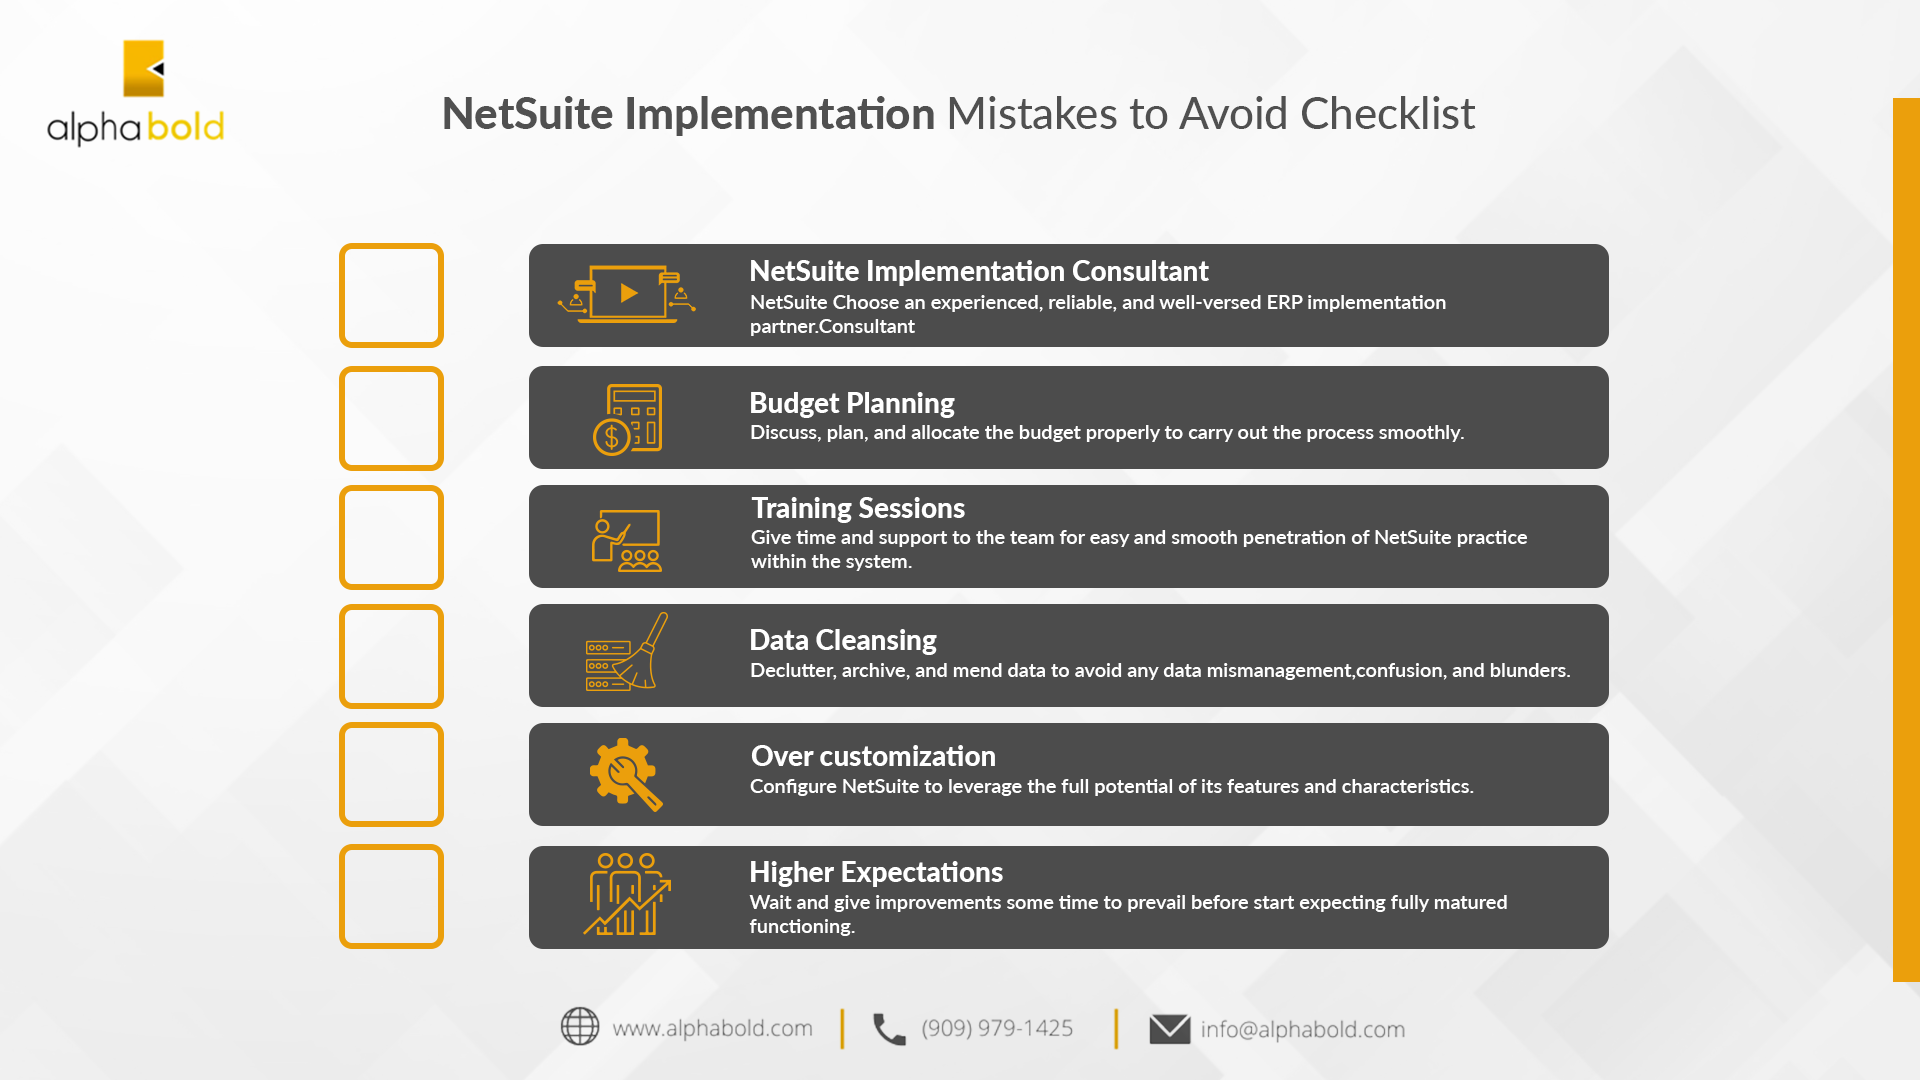 NetSuite implementation mistakes